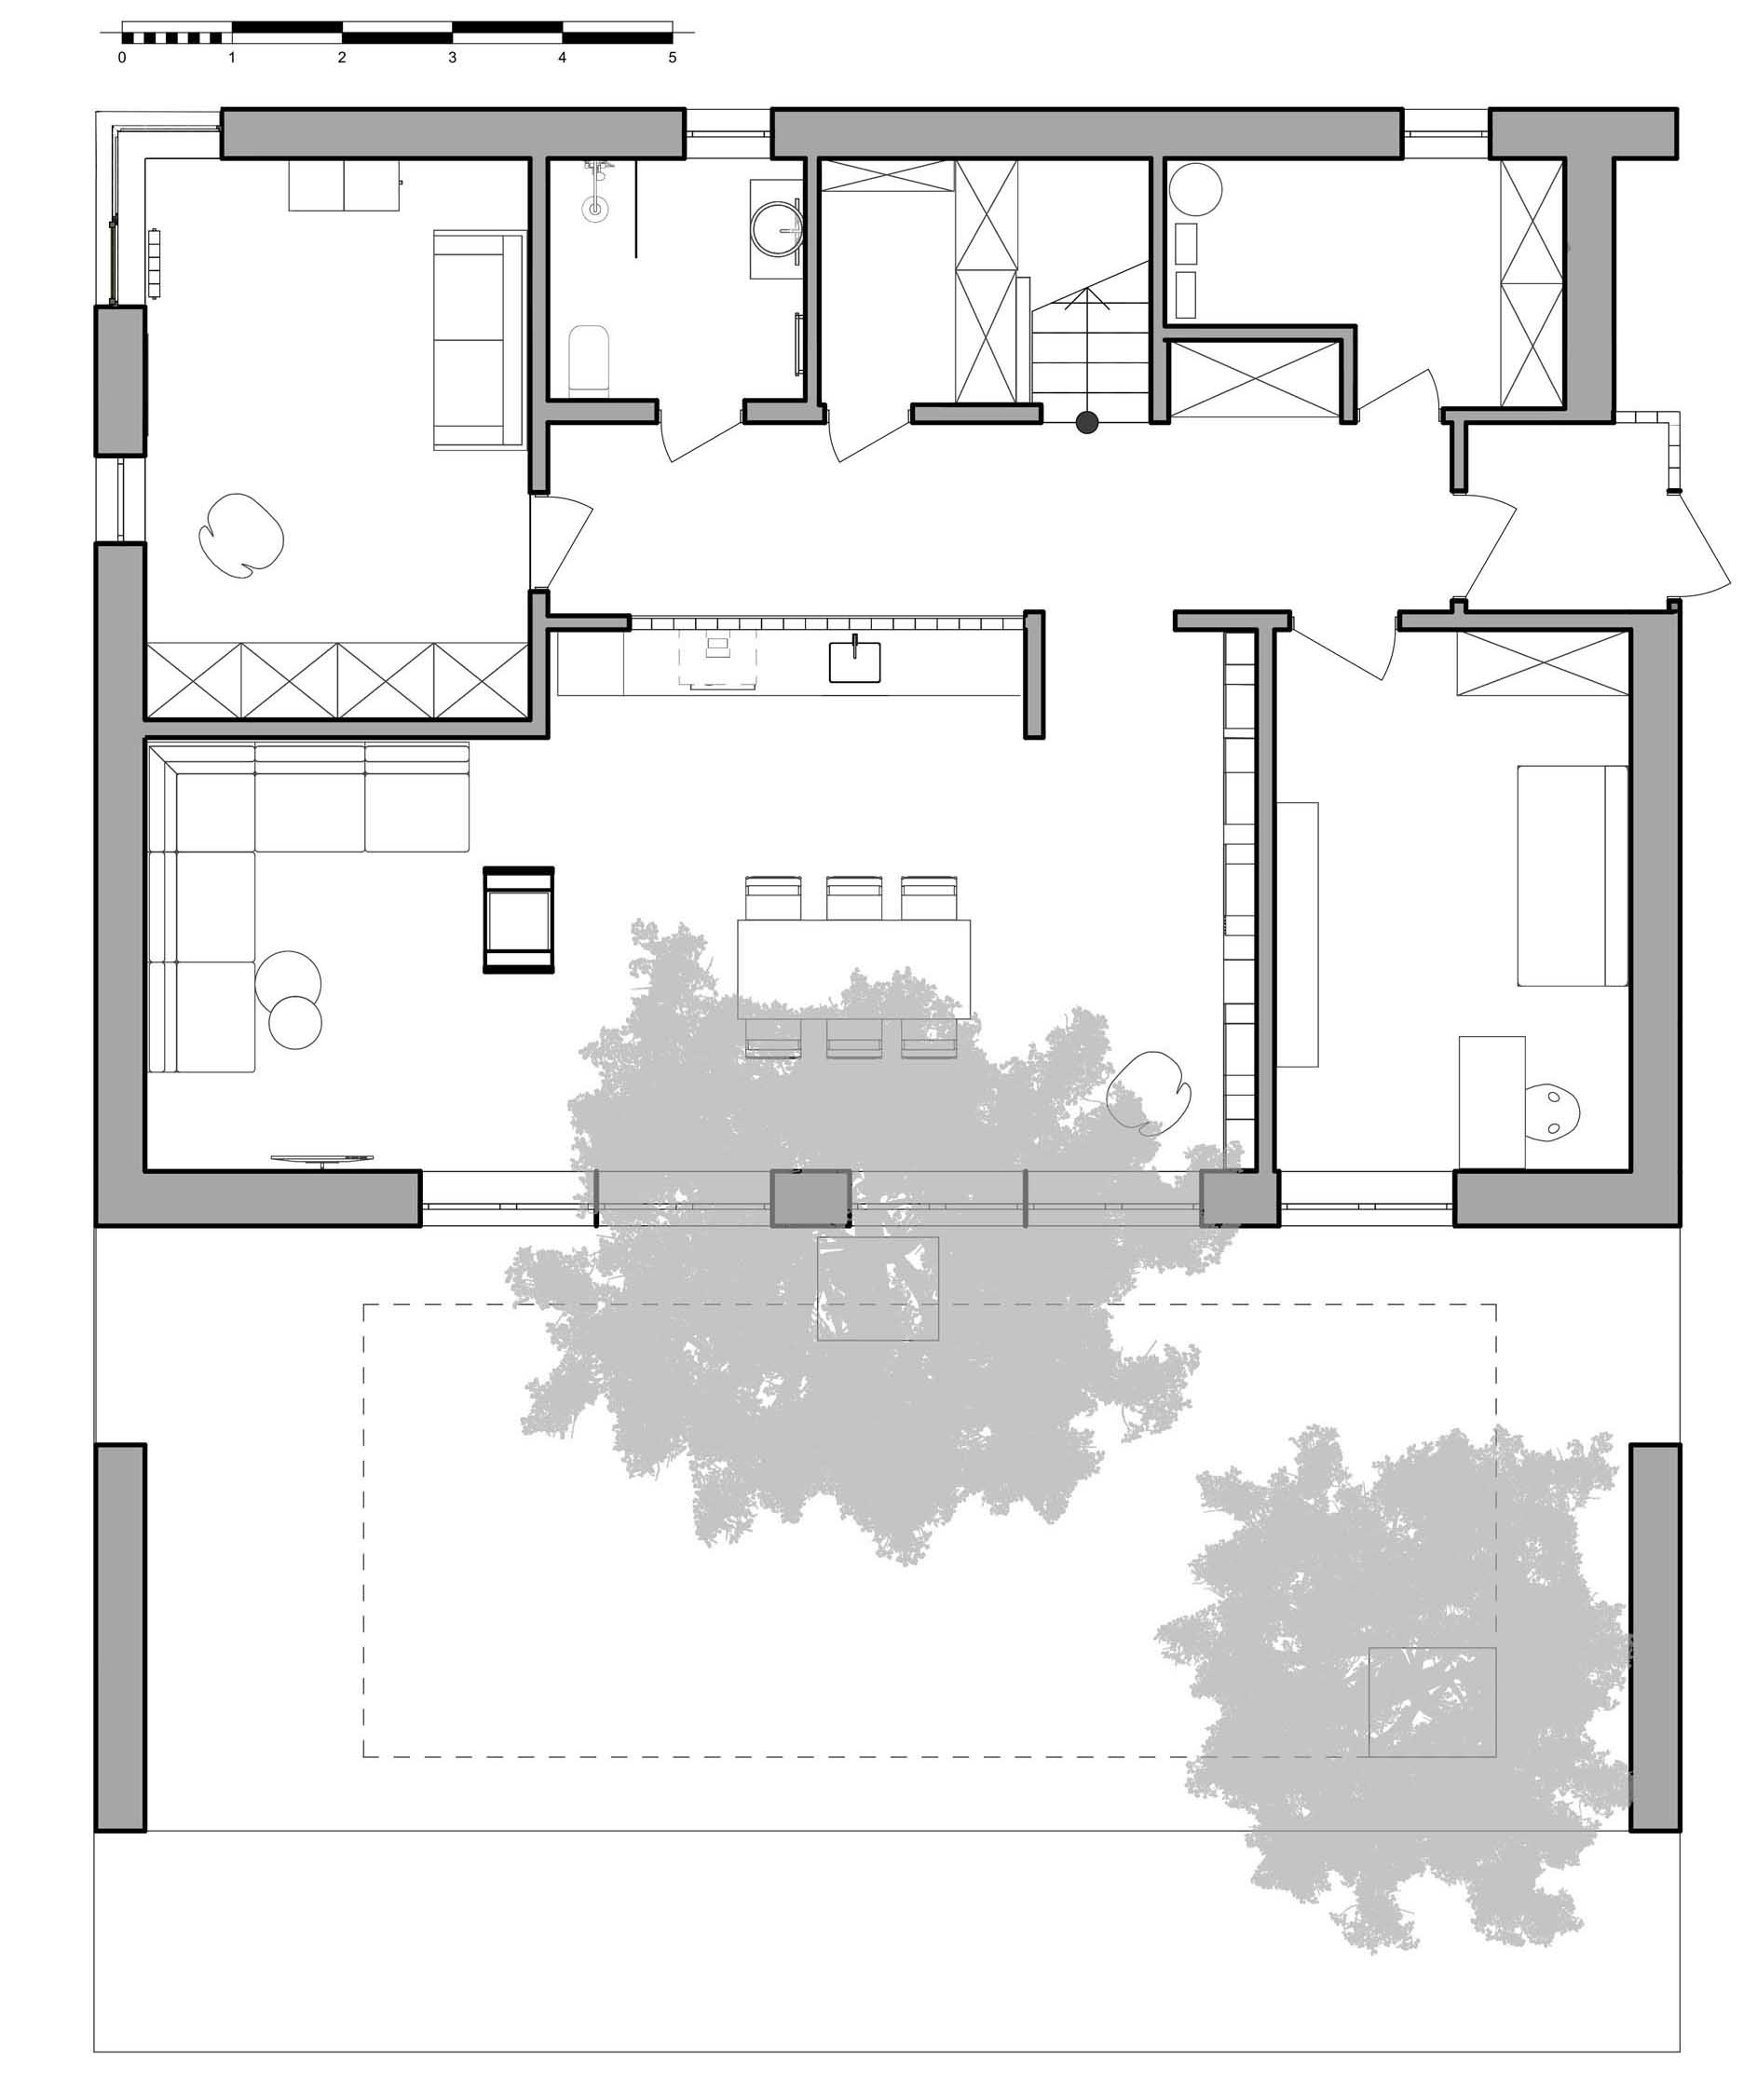 The floor plan of a modern house with a sloped green roof.